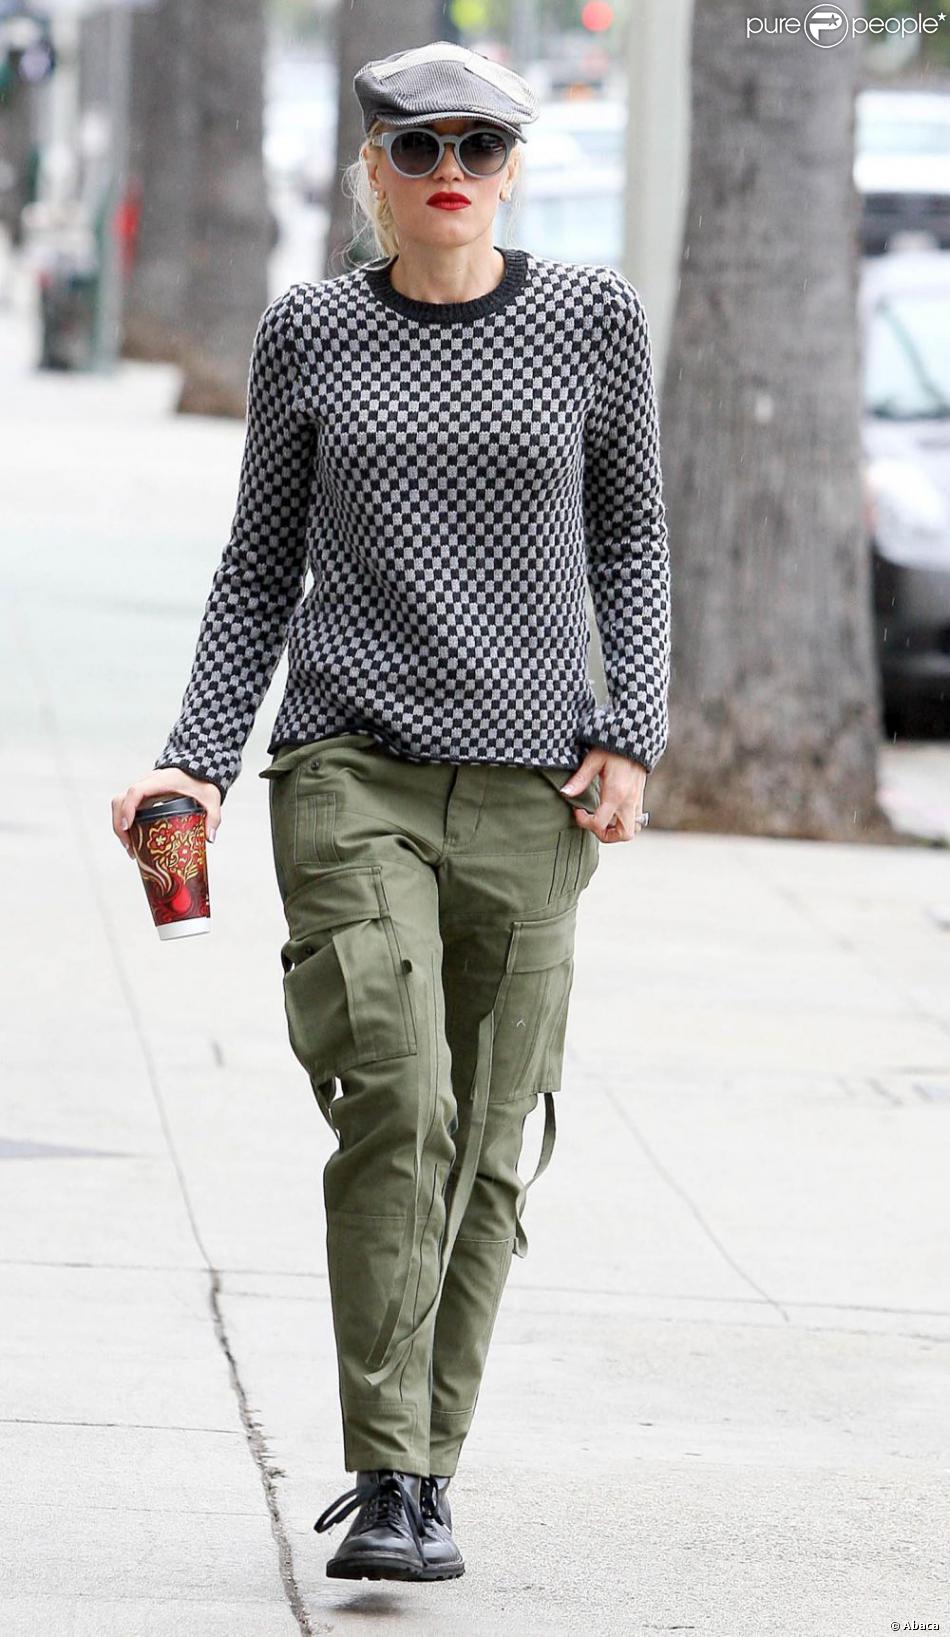 Throwback Thursday: Cargo Pants Are Making A Comeback!